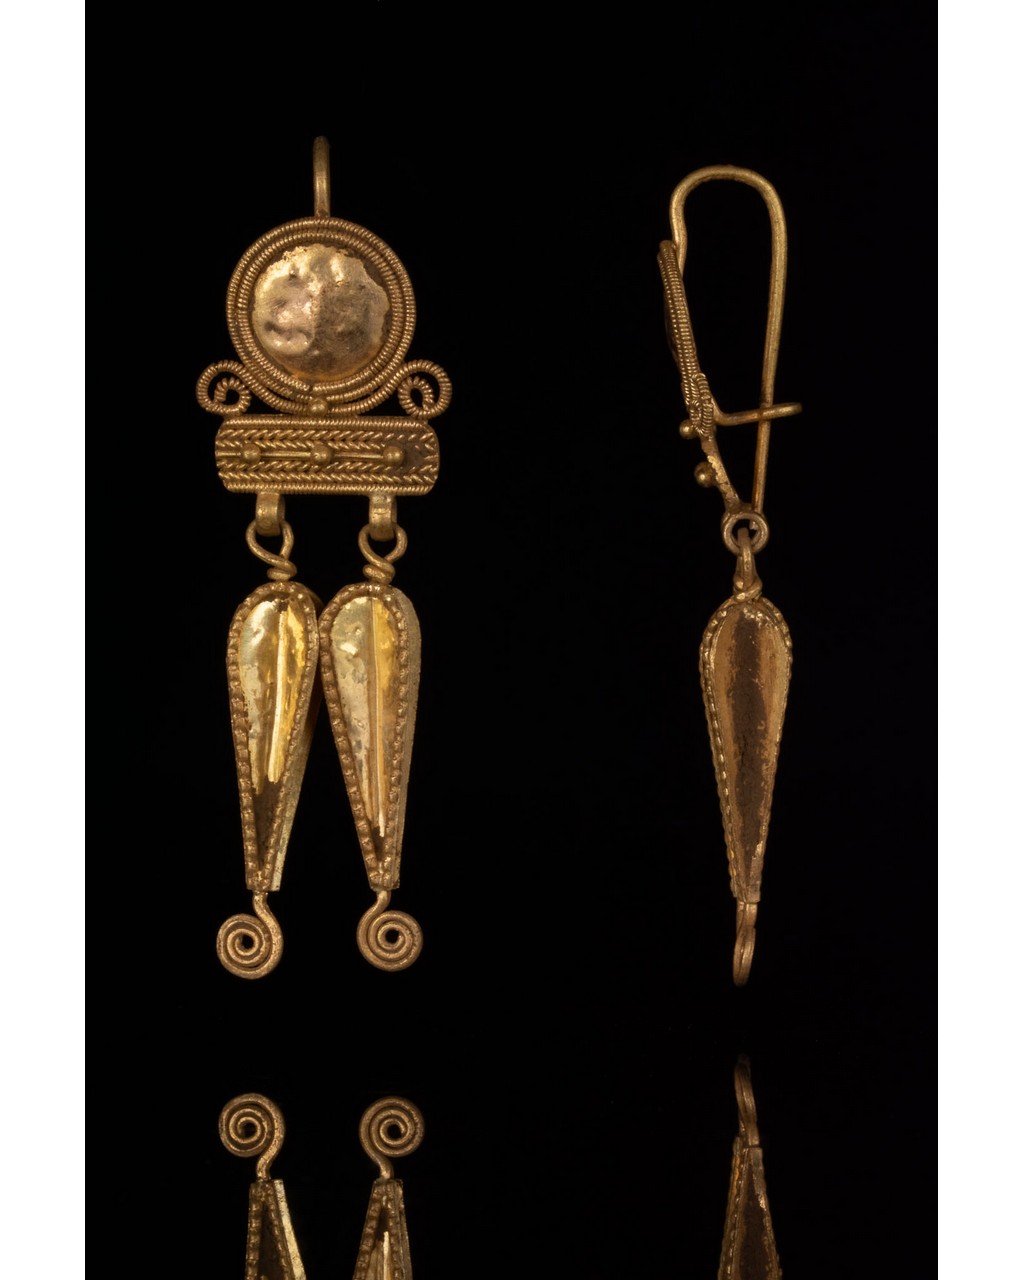 ROMAN GOLD ELABORATELY DECORATED EARRINGS - Image 2 of 5